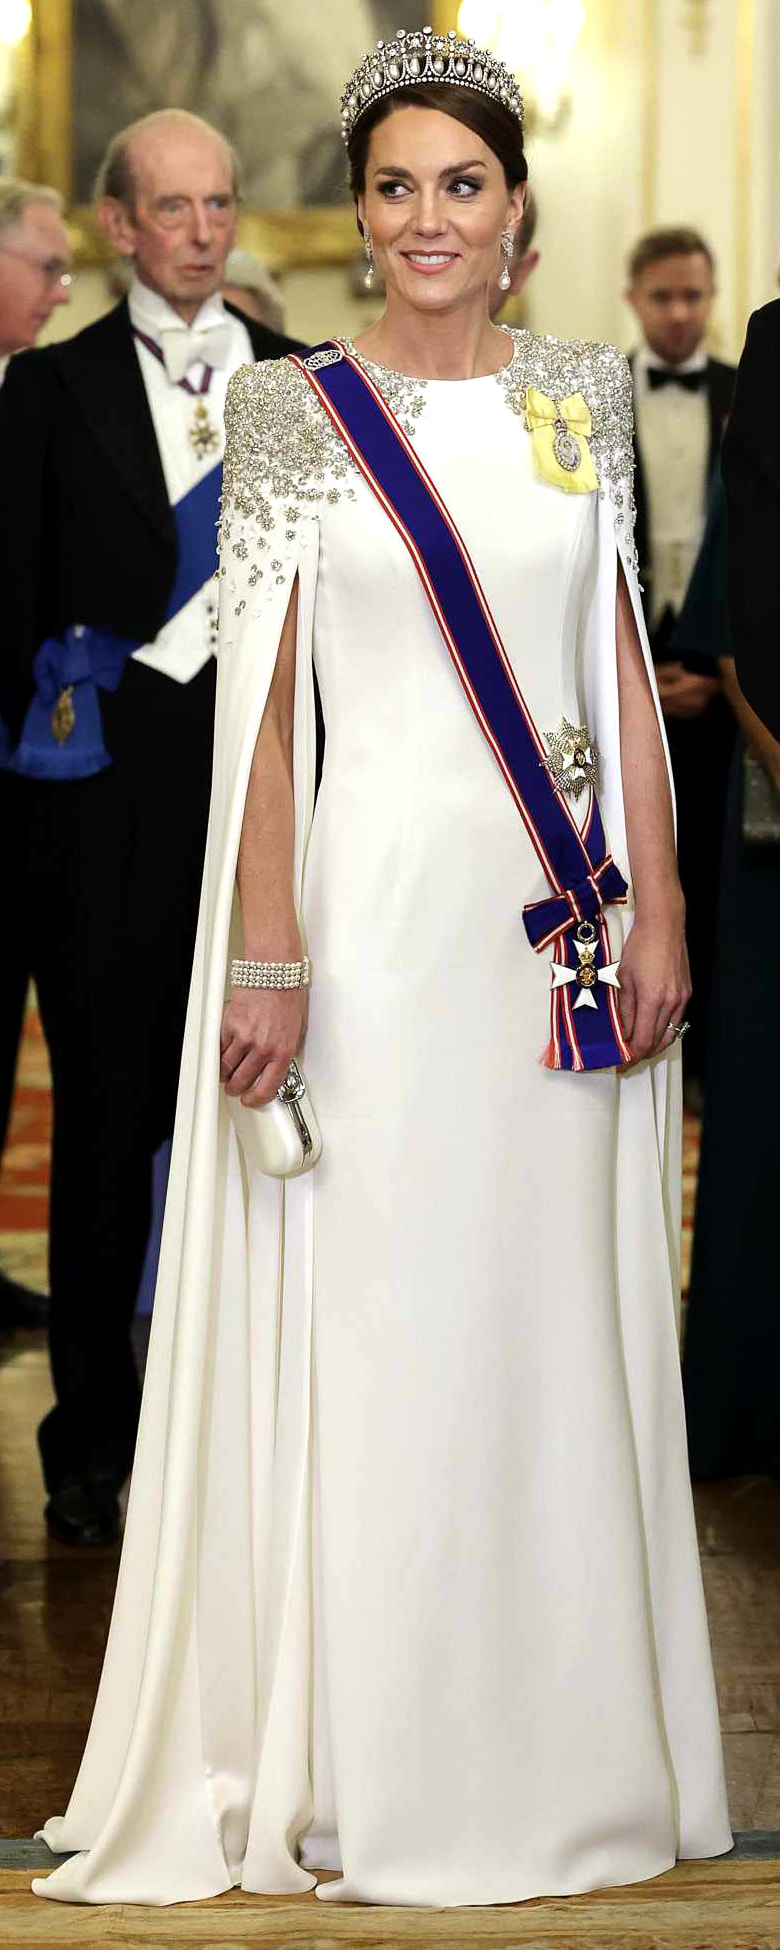 Jenny Packham Elspeth Cape Gown in Ivory as seen on Kate Middleton, Princess of Wales.